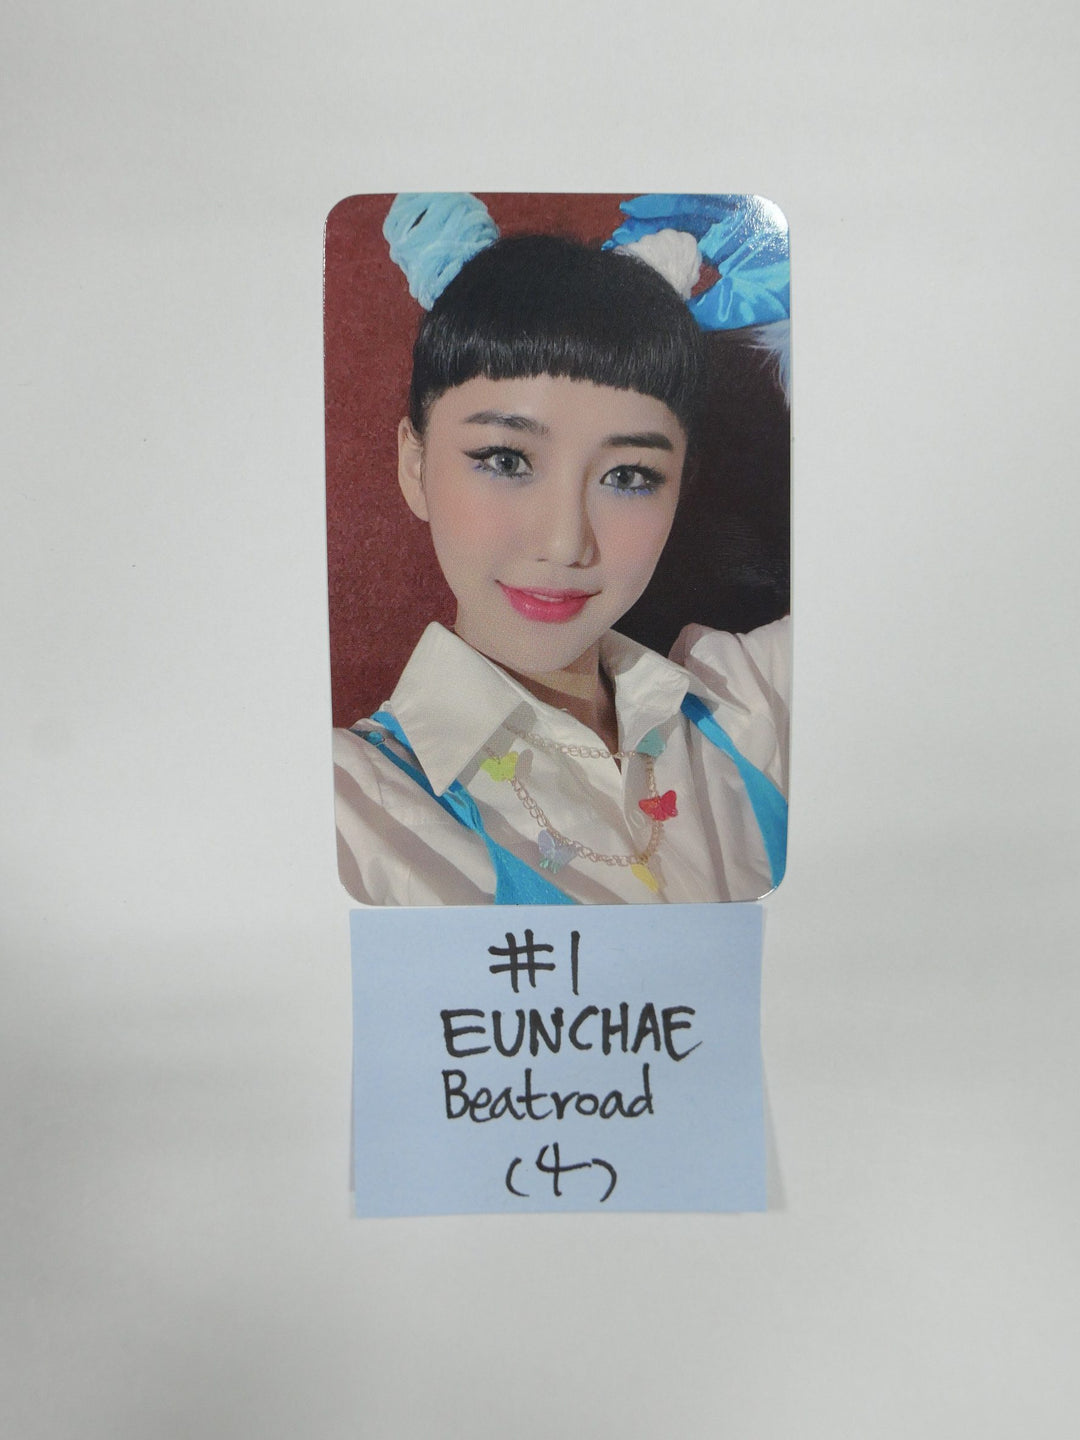 Bugaboo 'Bugaboo' 1st Single - Beatroad Fansign Event Photocard